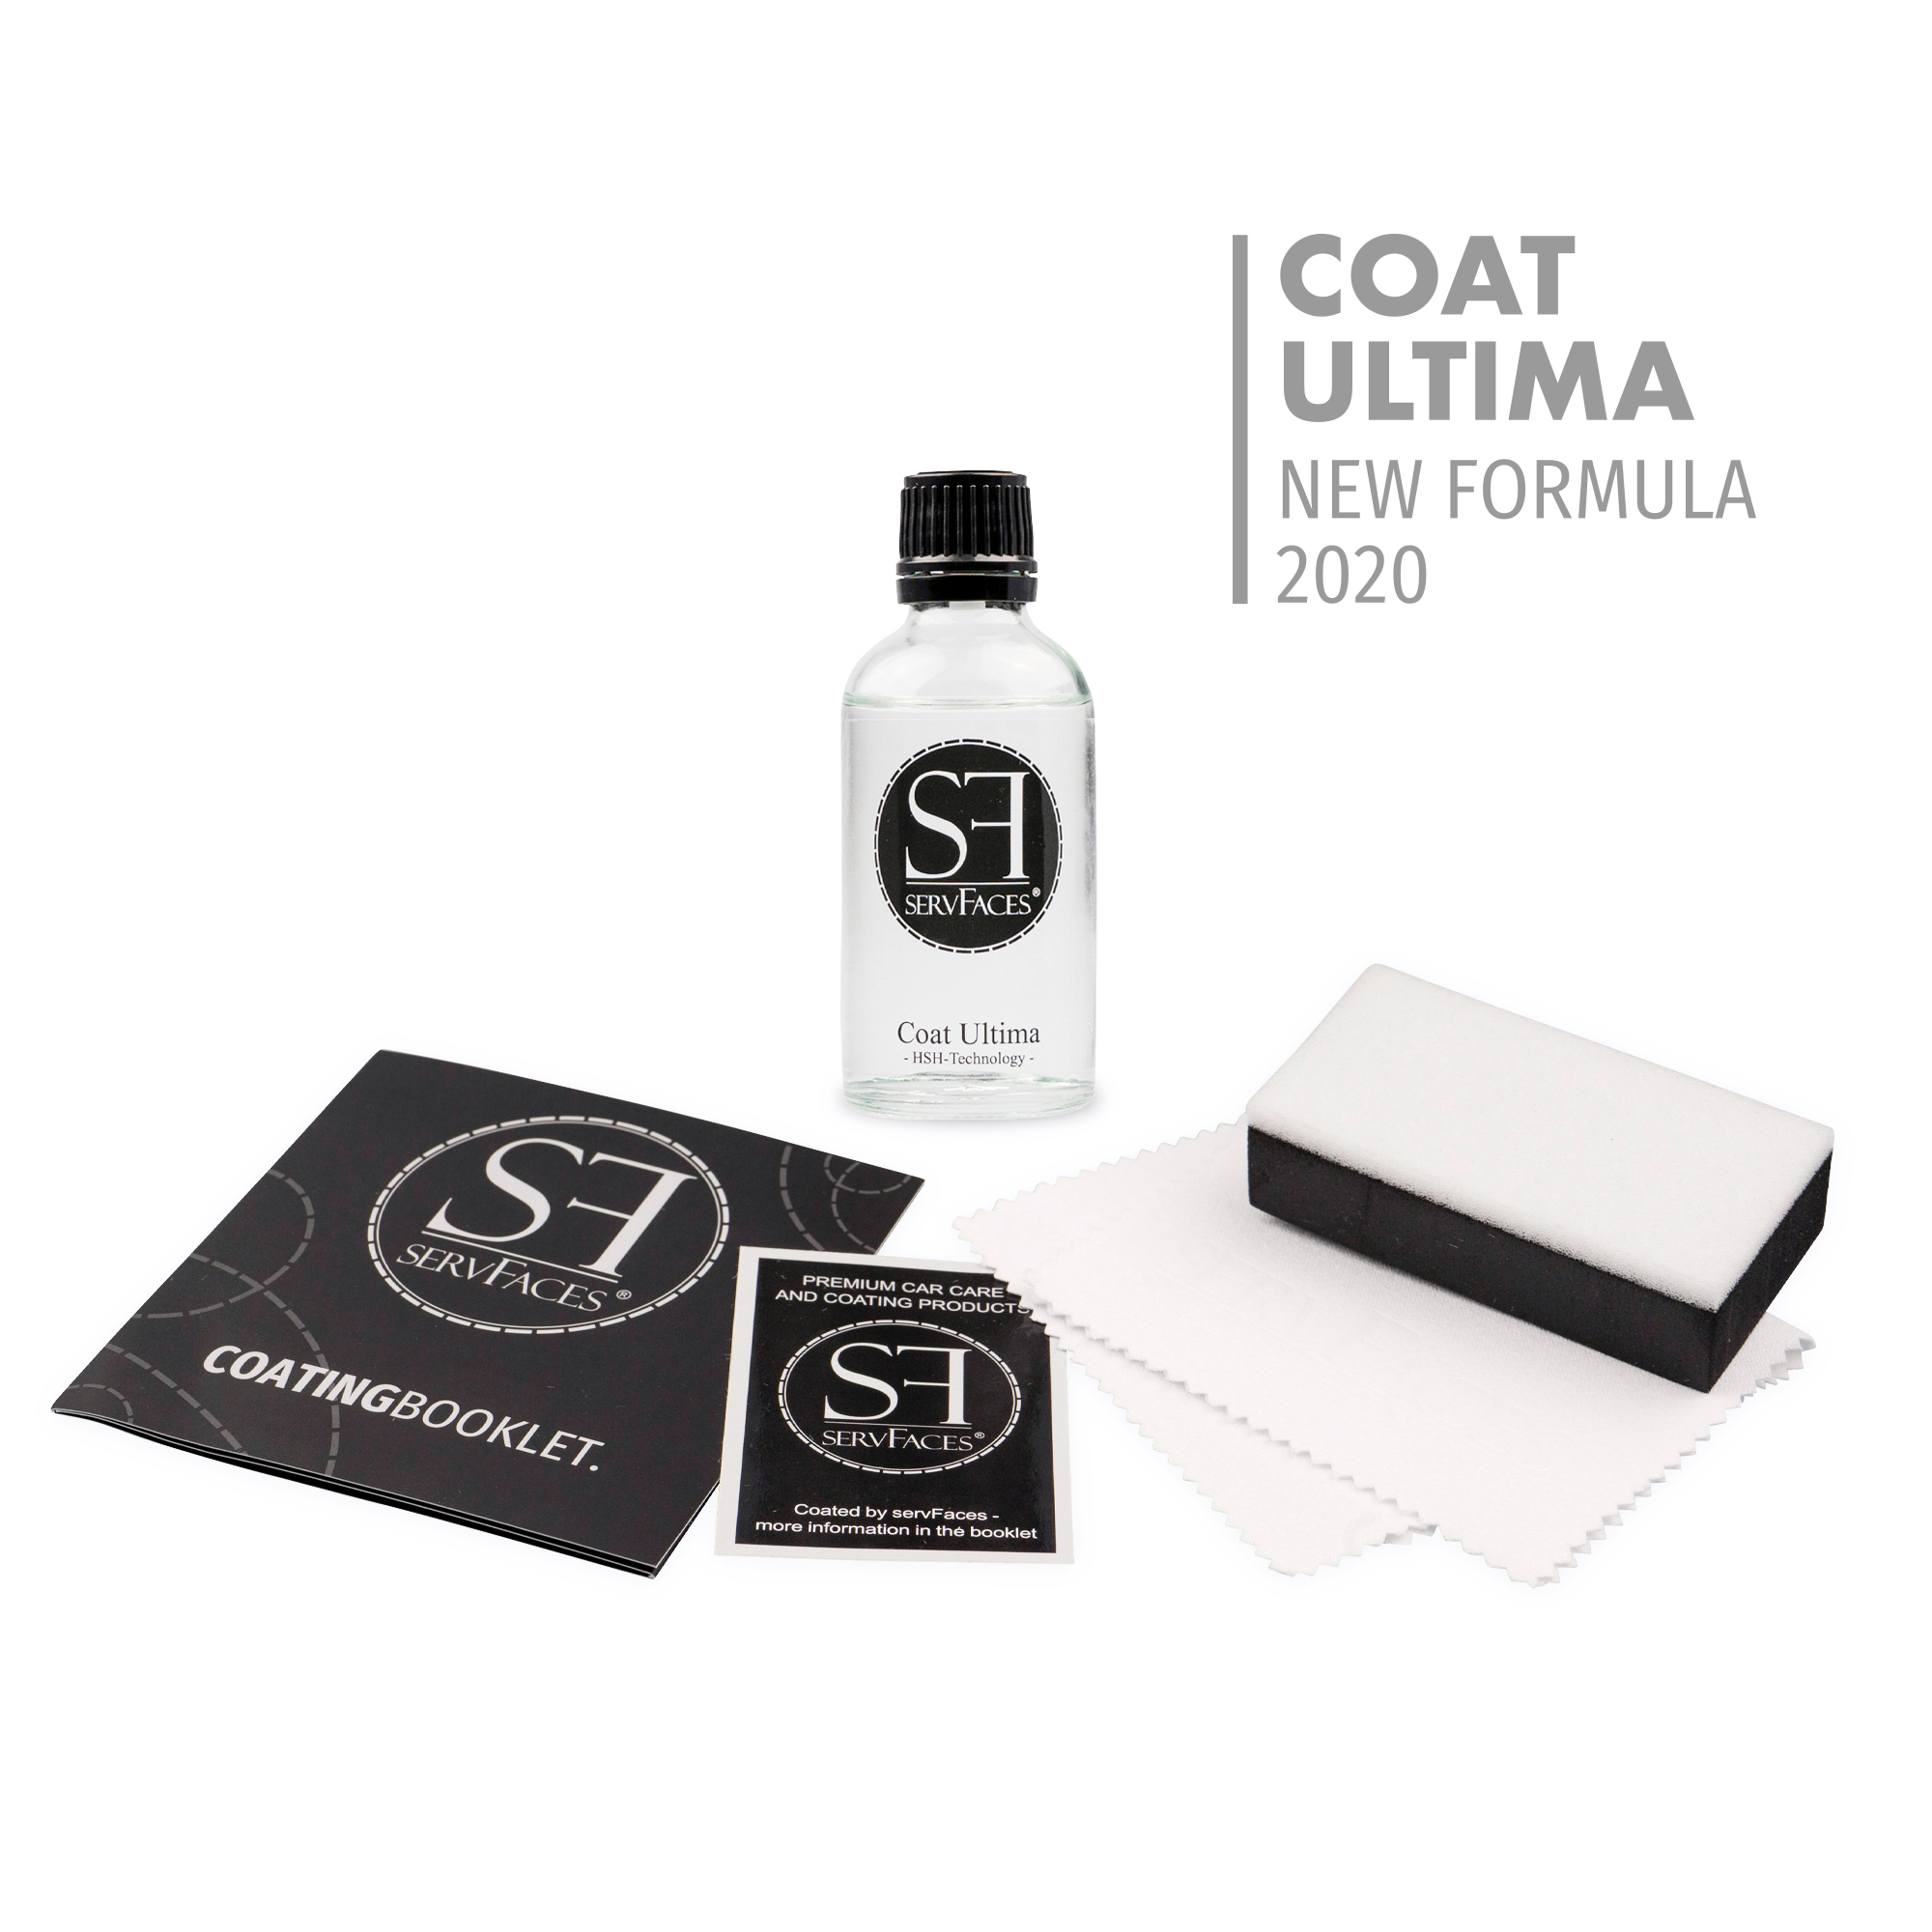 Coat Ultima - HSH-Technology - | servFaces – Premium Car Care & Coating Products